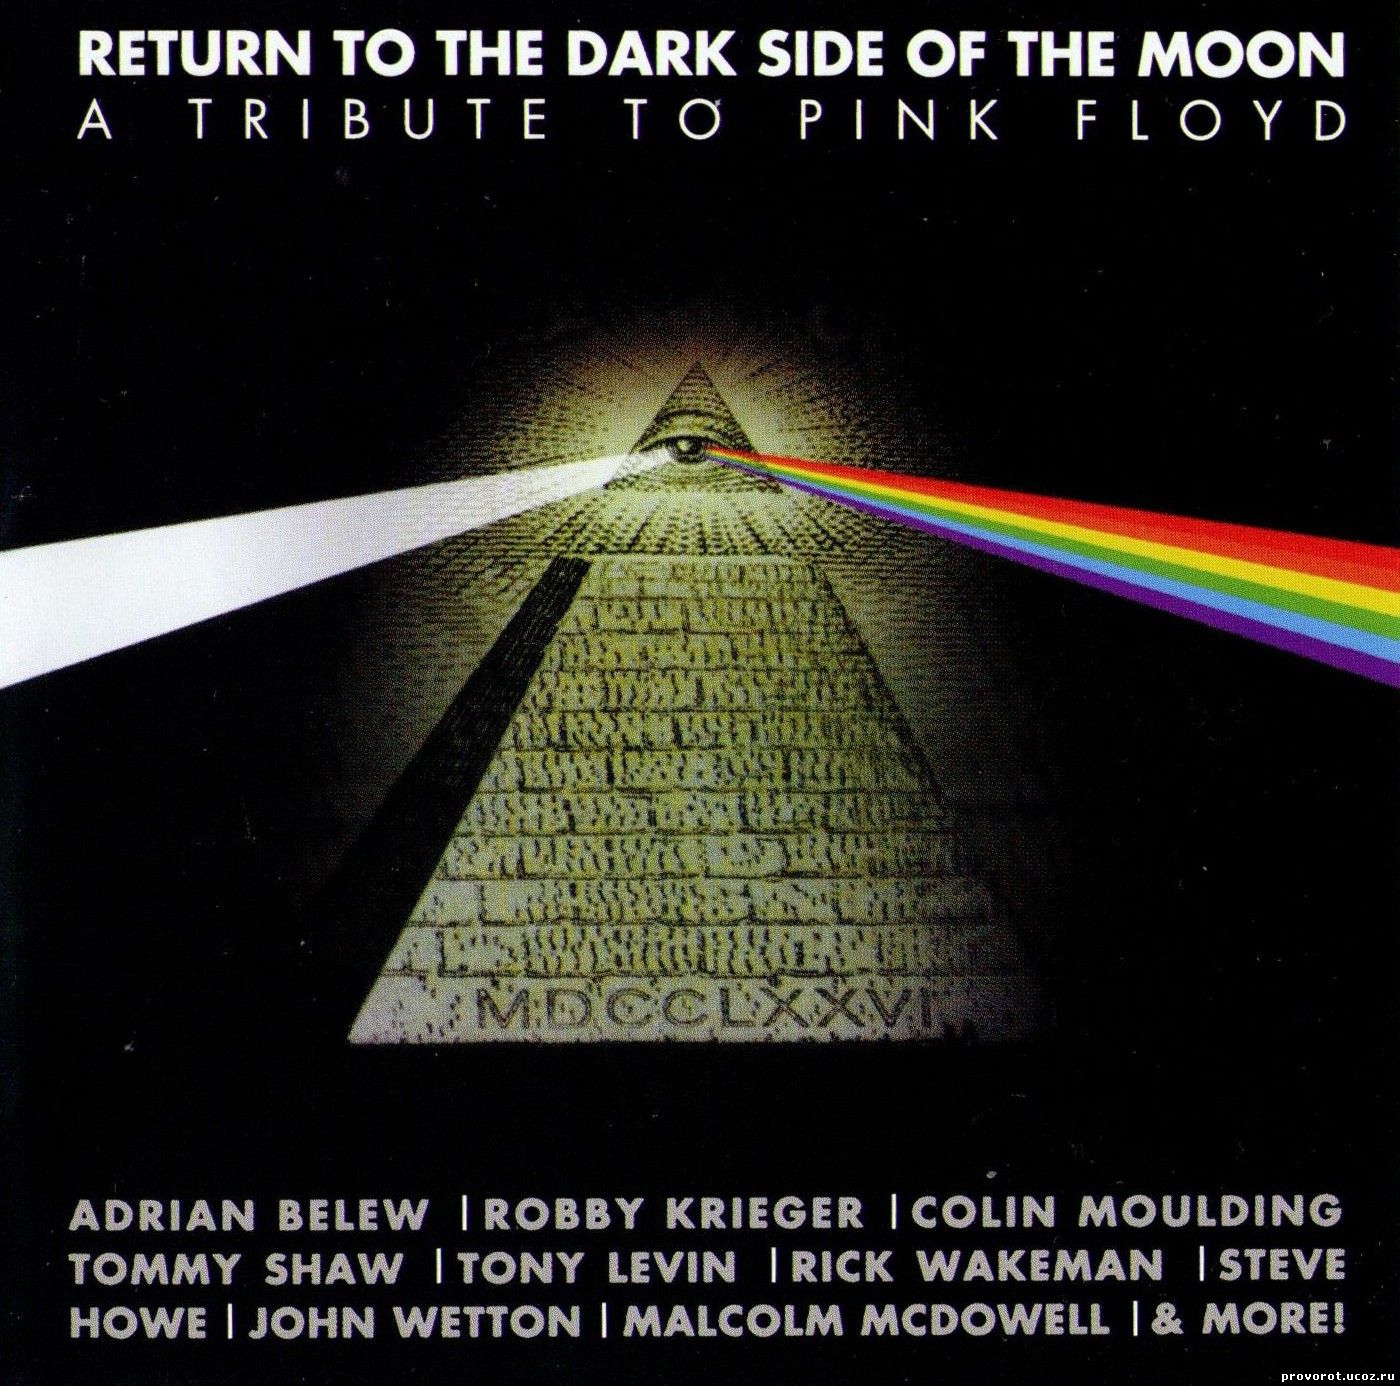 Billy Sherwood & Friends - Return To The Dark Side Of The Moon - A Tribute To Pink Floyd 2006